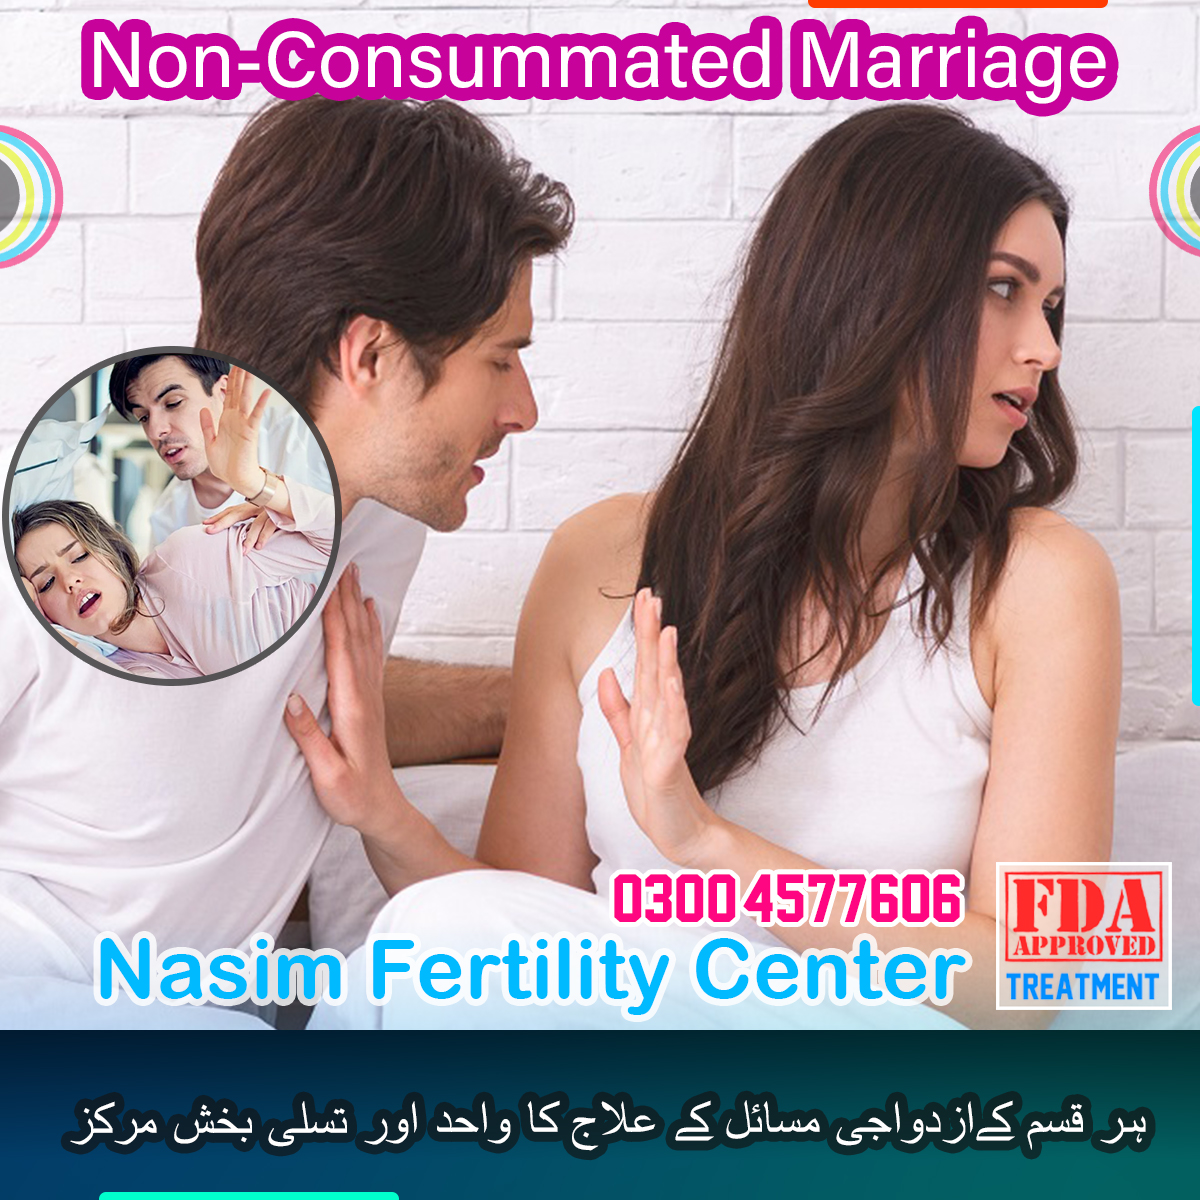 For couples who are struggling with #sexlessmarriage, seeking help from a qualified sexologist can be a game-changer. 
.
Dr. Farooq is a #topsexologist who has helped countless couples overcome this issue.

Call 0300 4577606 to book your appointment. 
.
#Fertilitycenter